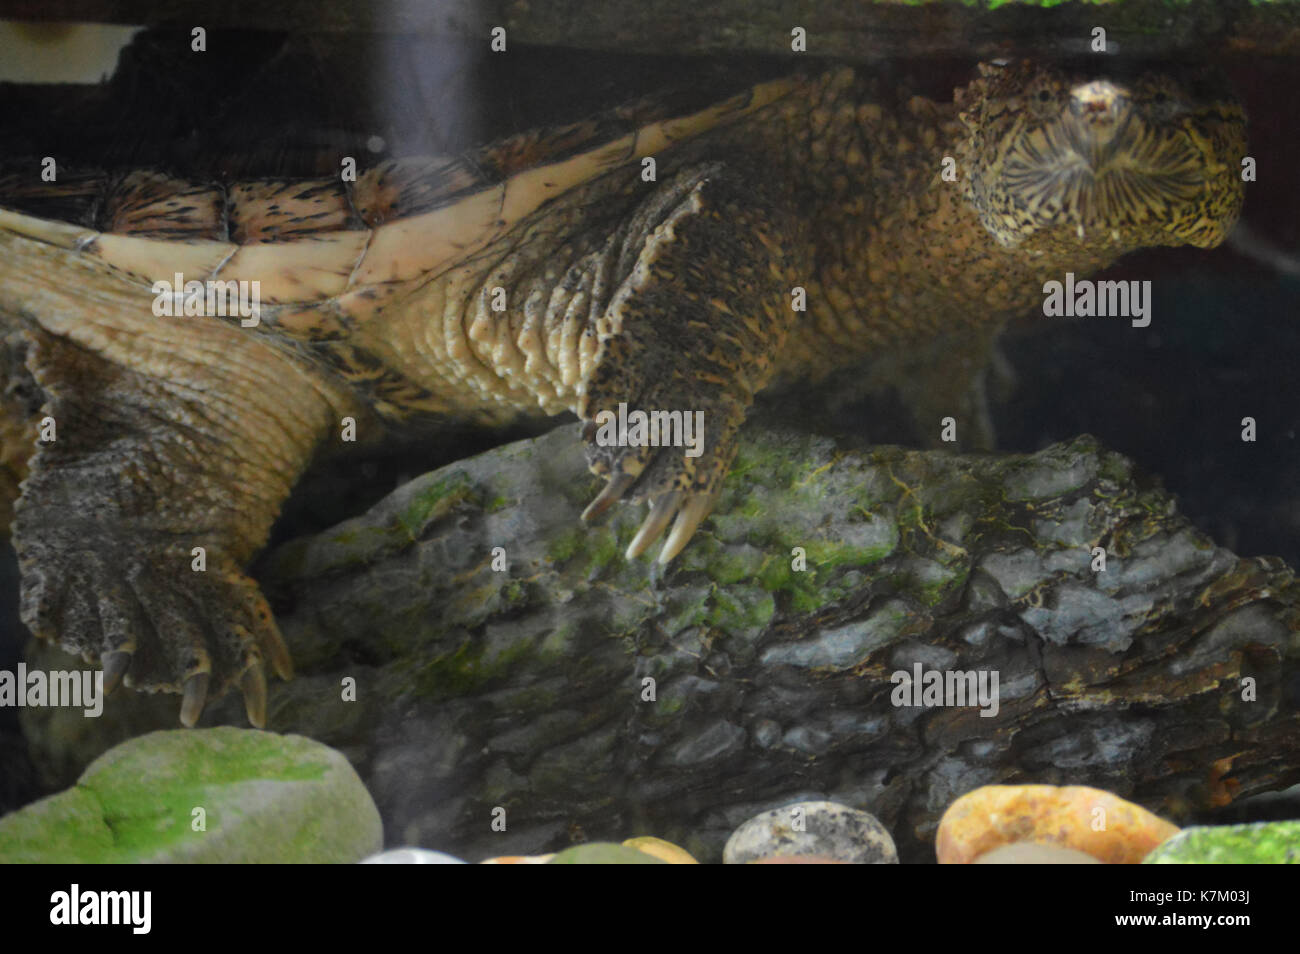 Snapping turtle in the water Stock Photo